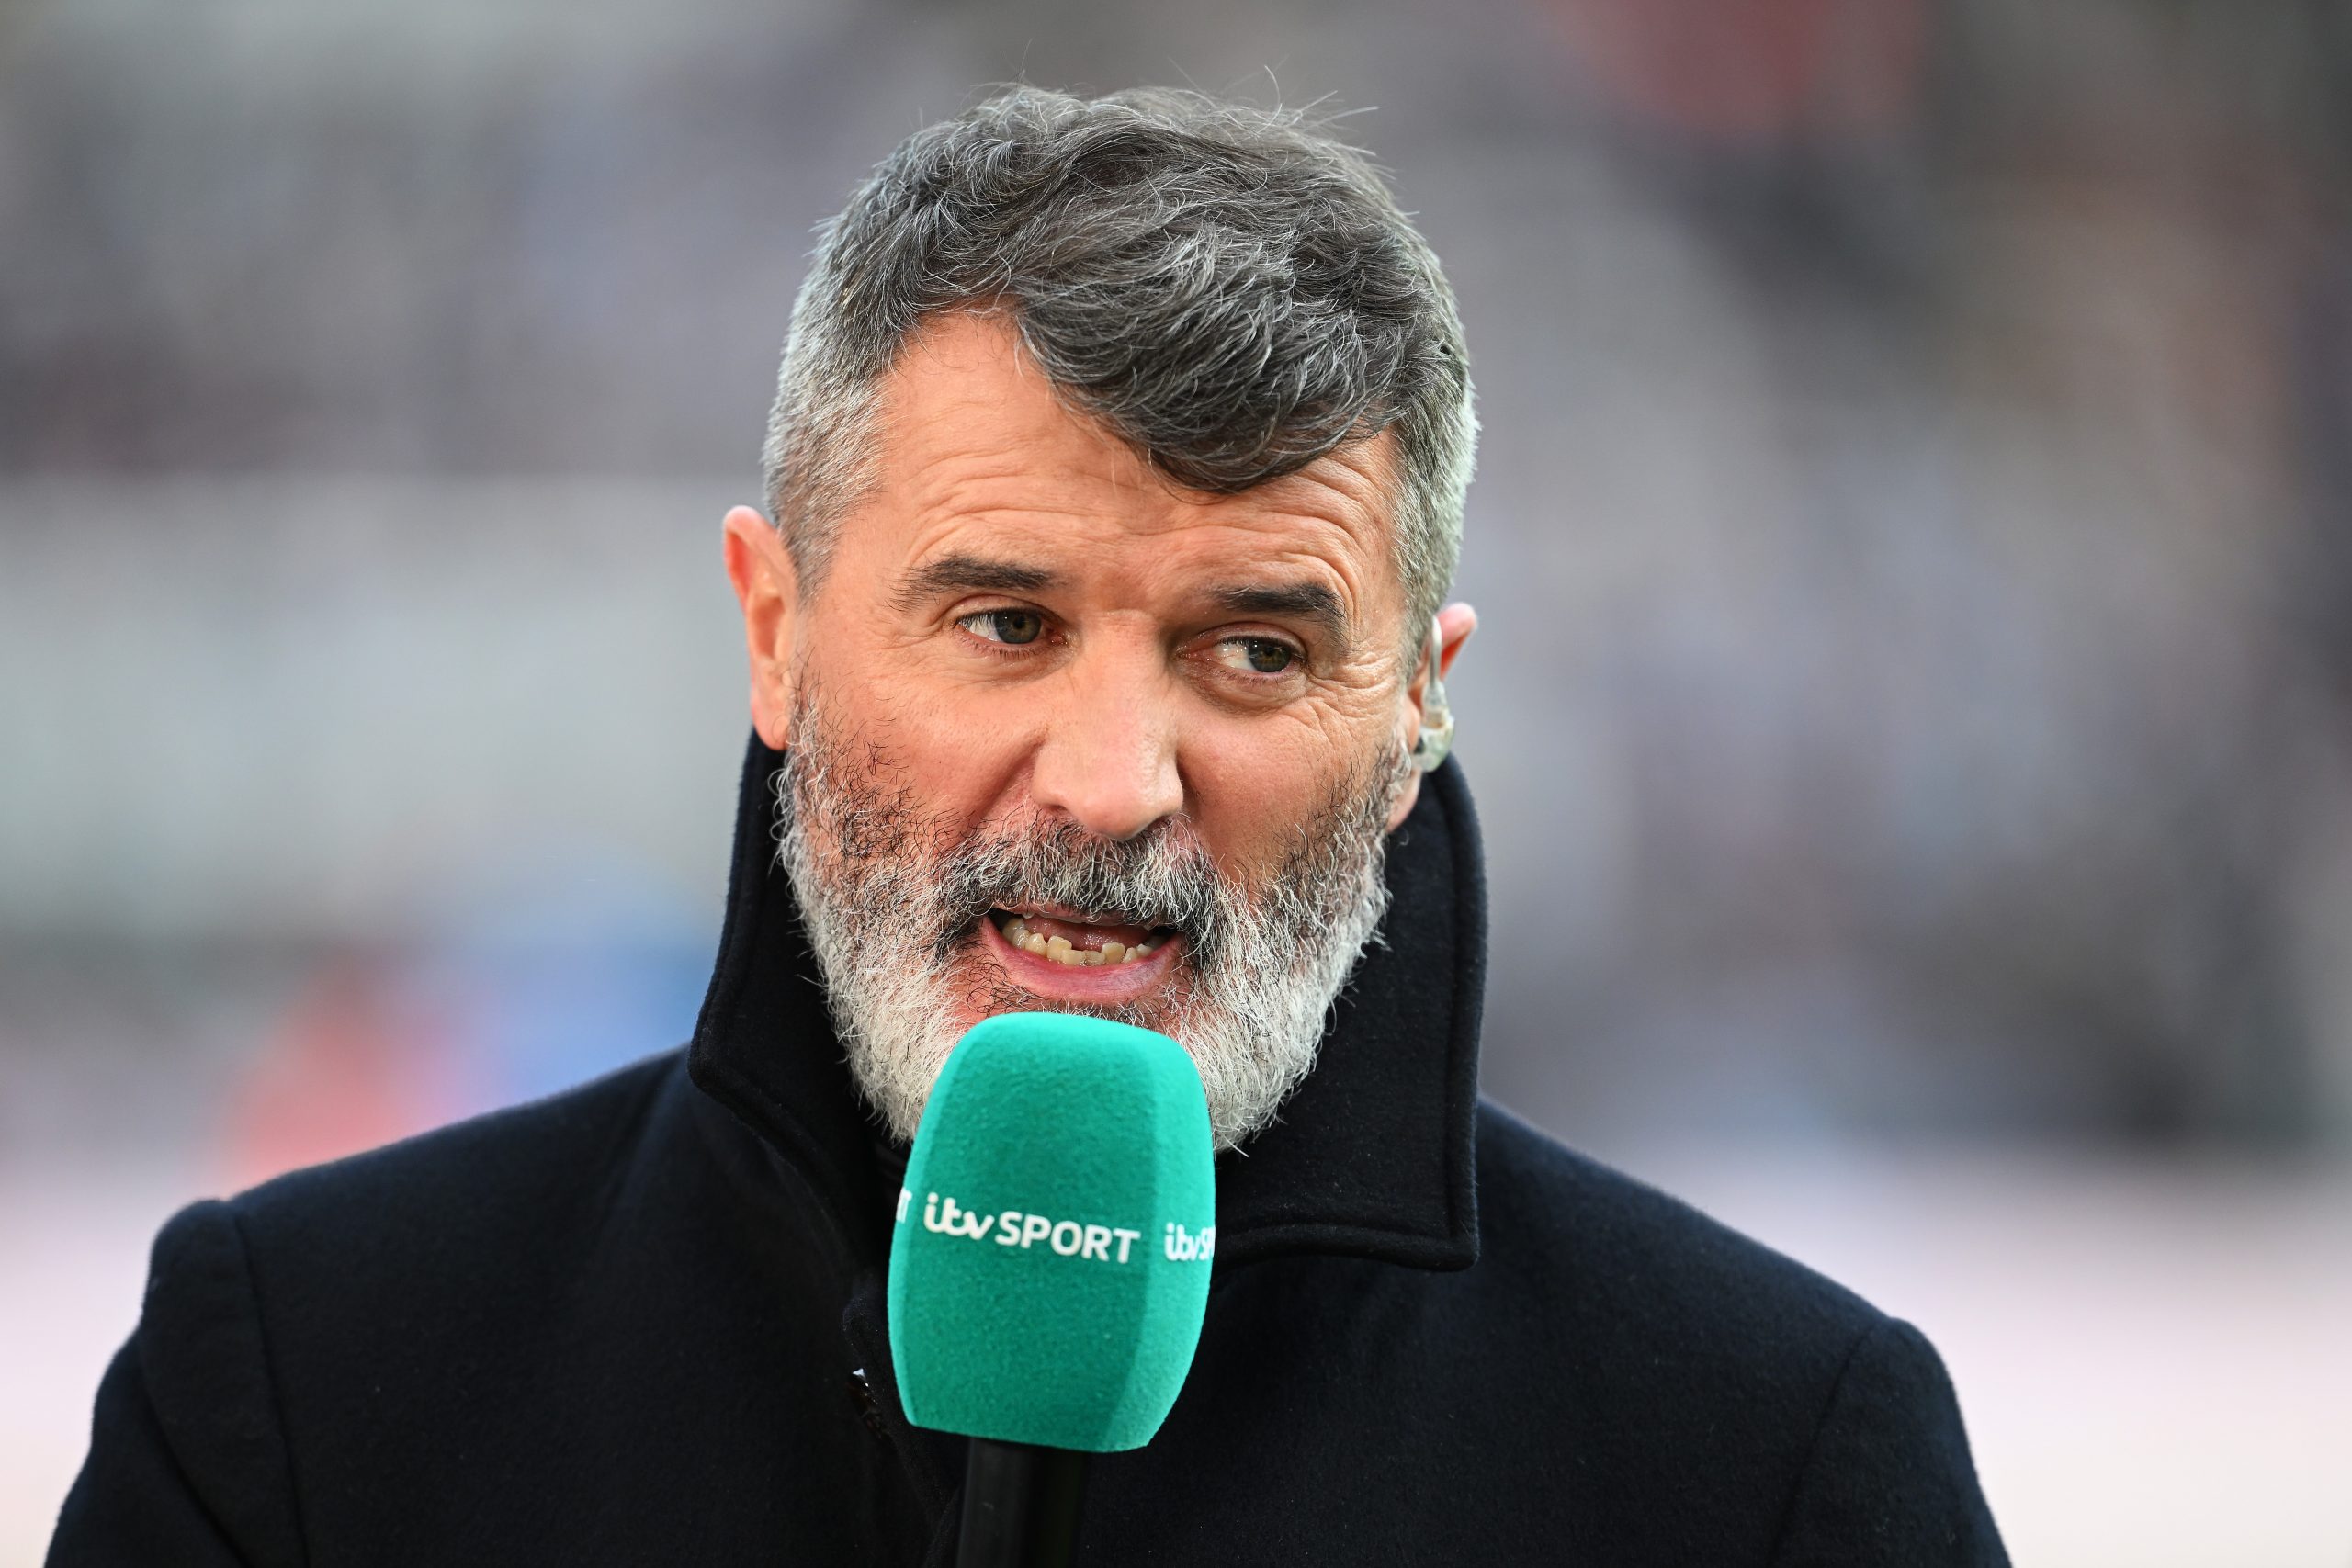 Manchester United legend Roy Keane helped Arsenal play better, claims Patrick Vieira.